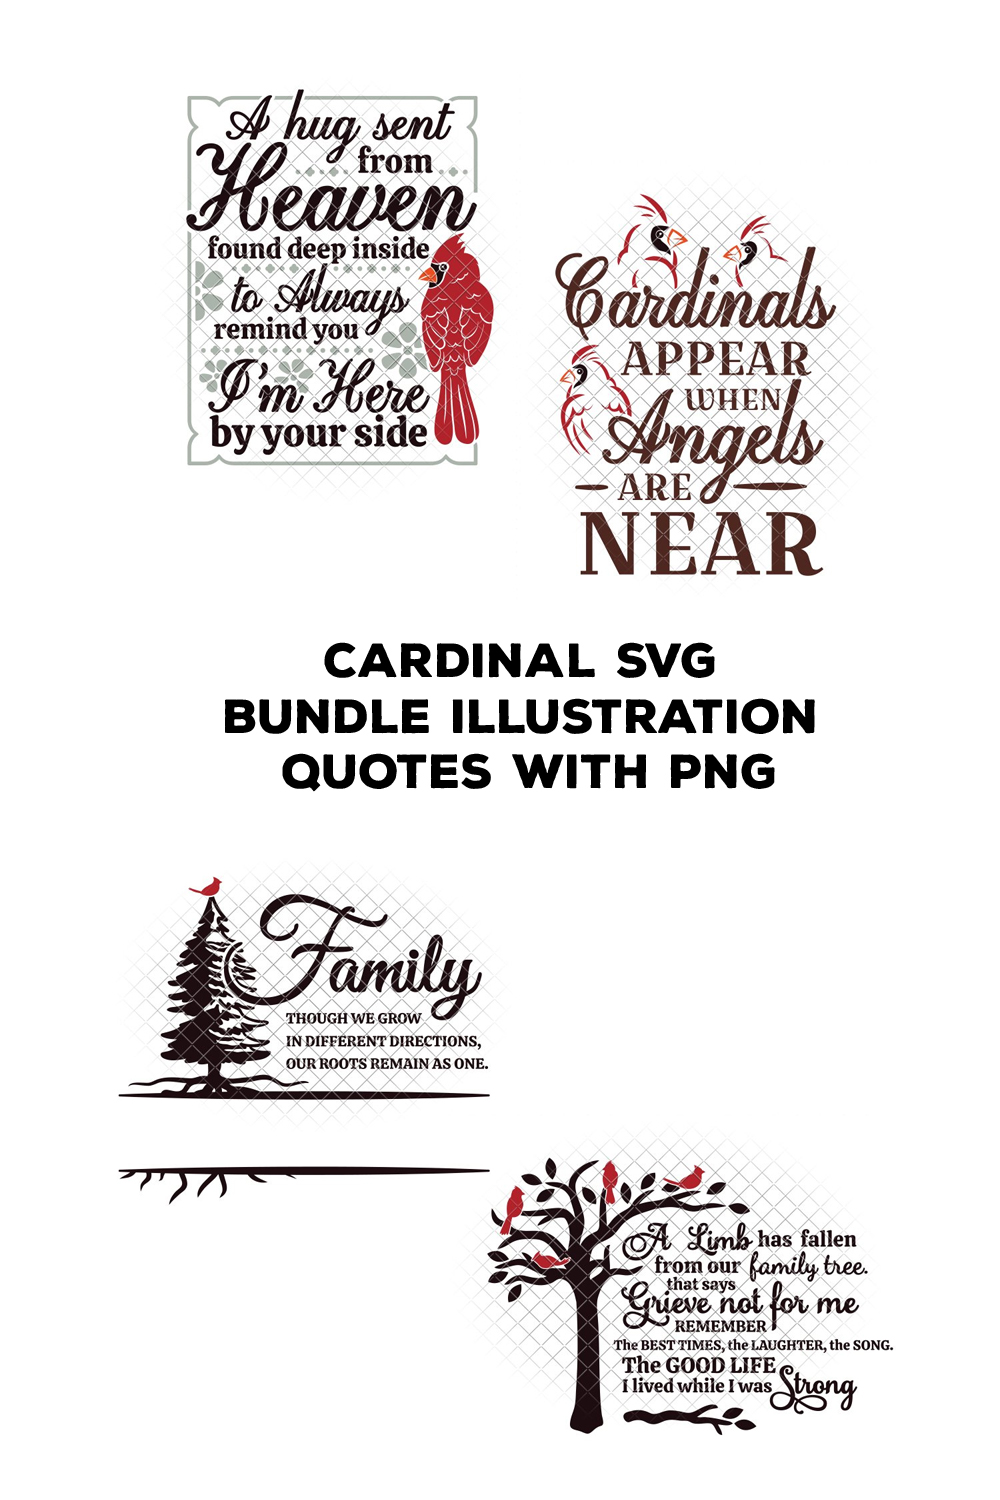 The cardinal svg bundle includes a quote and a tree.